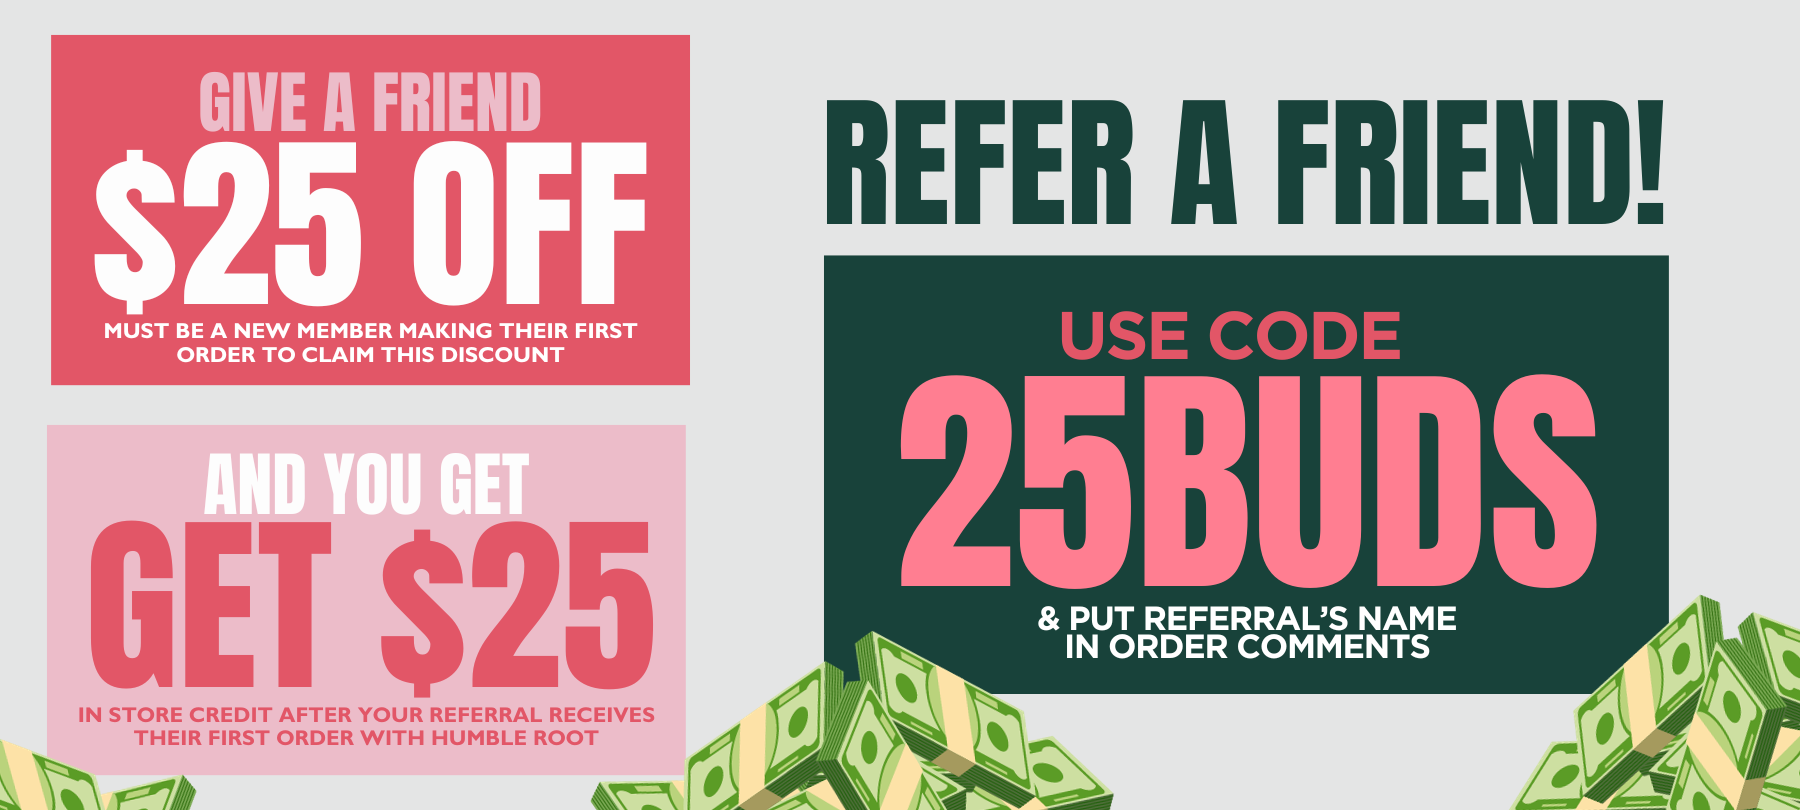 Refer a new friend & they get $25 off AND you get $25 in store credit